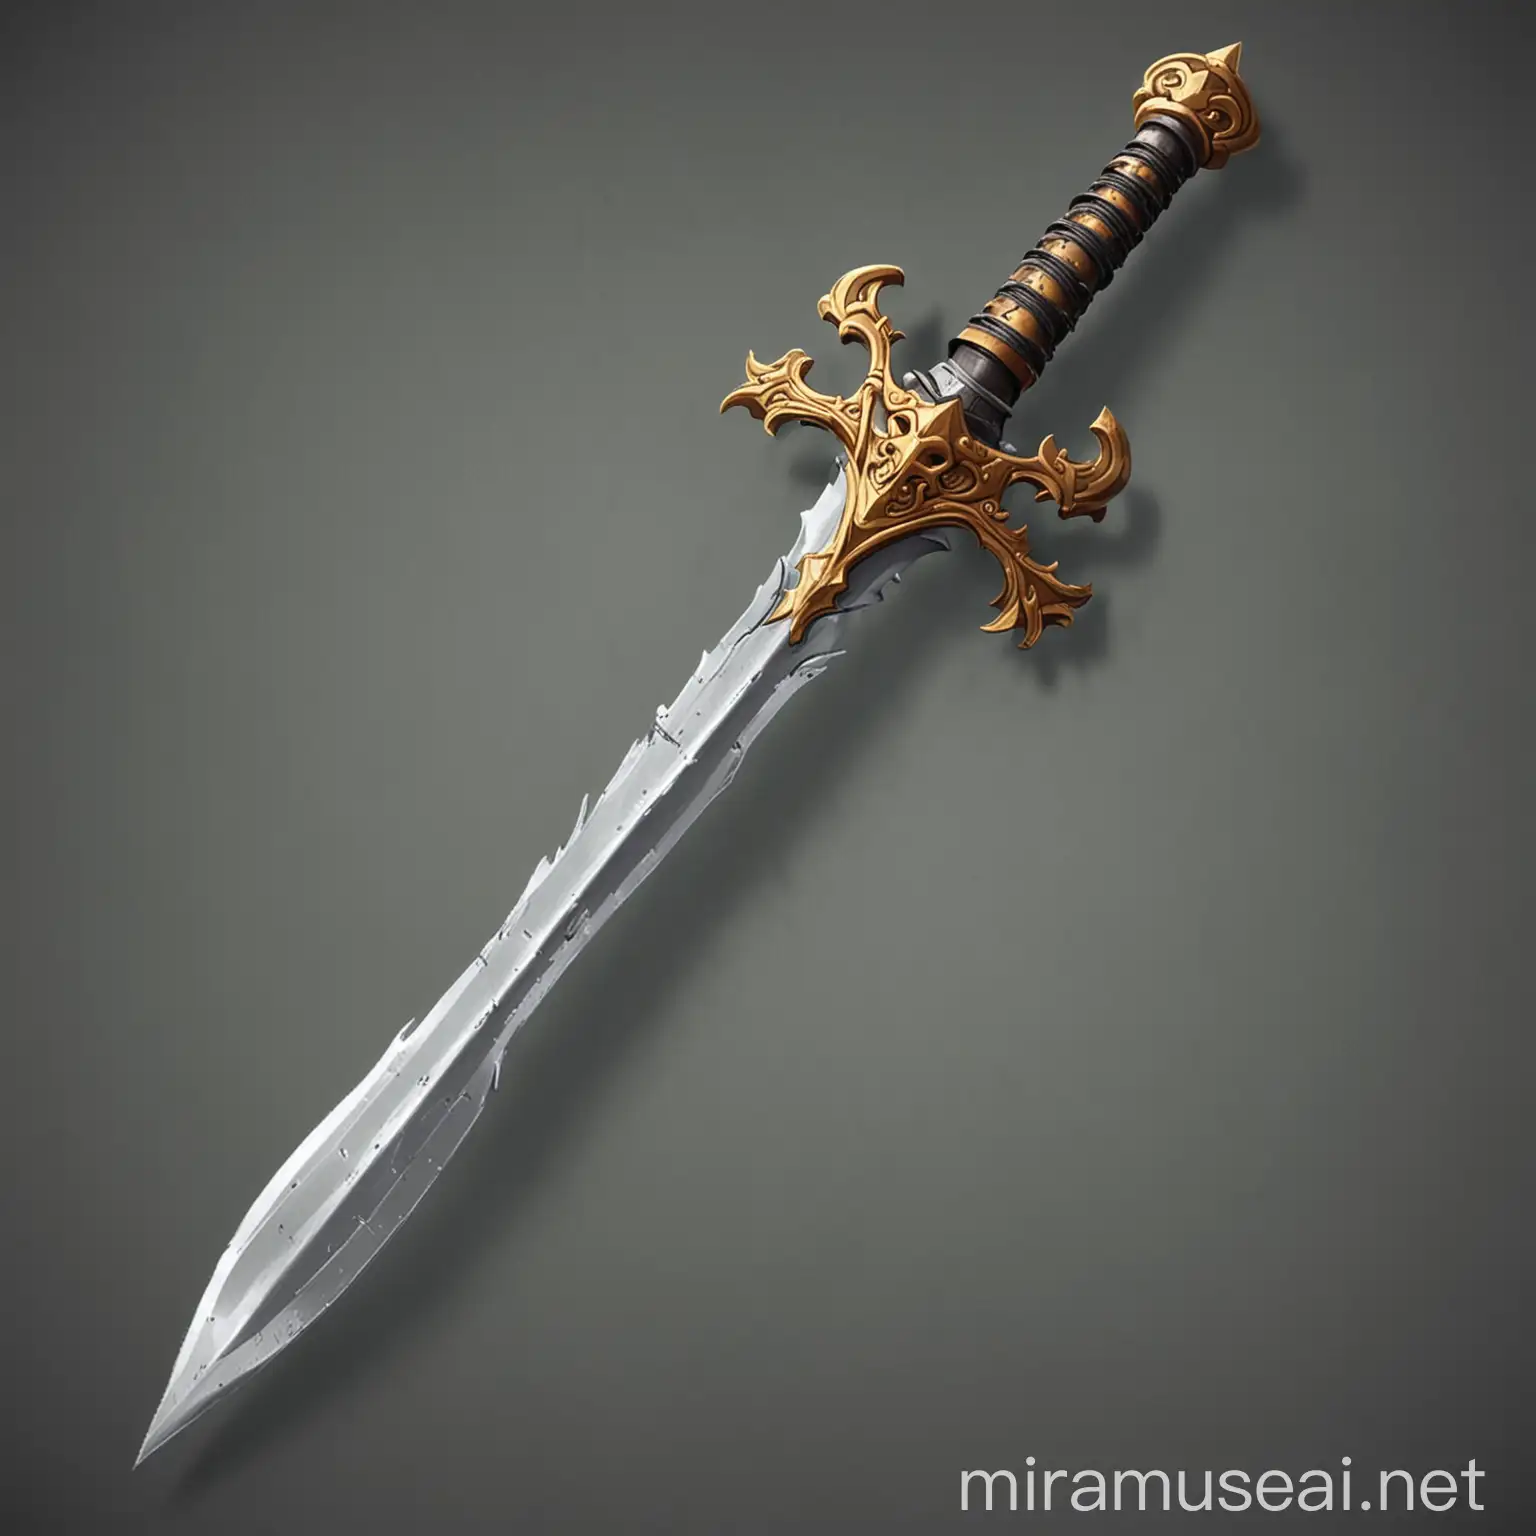 Colorful Cartoon Sword with Whimsical Design